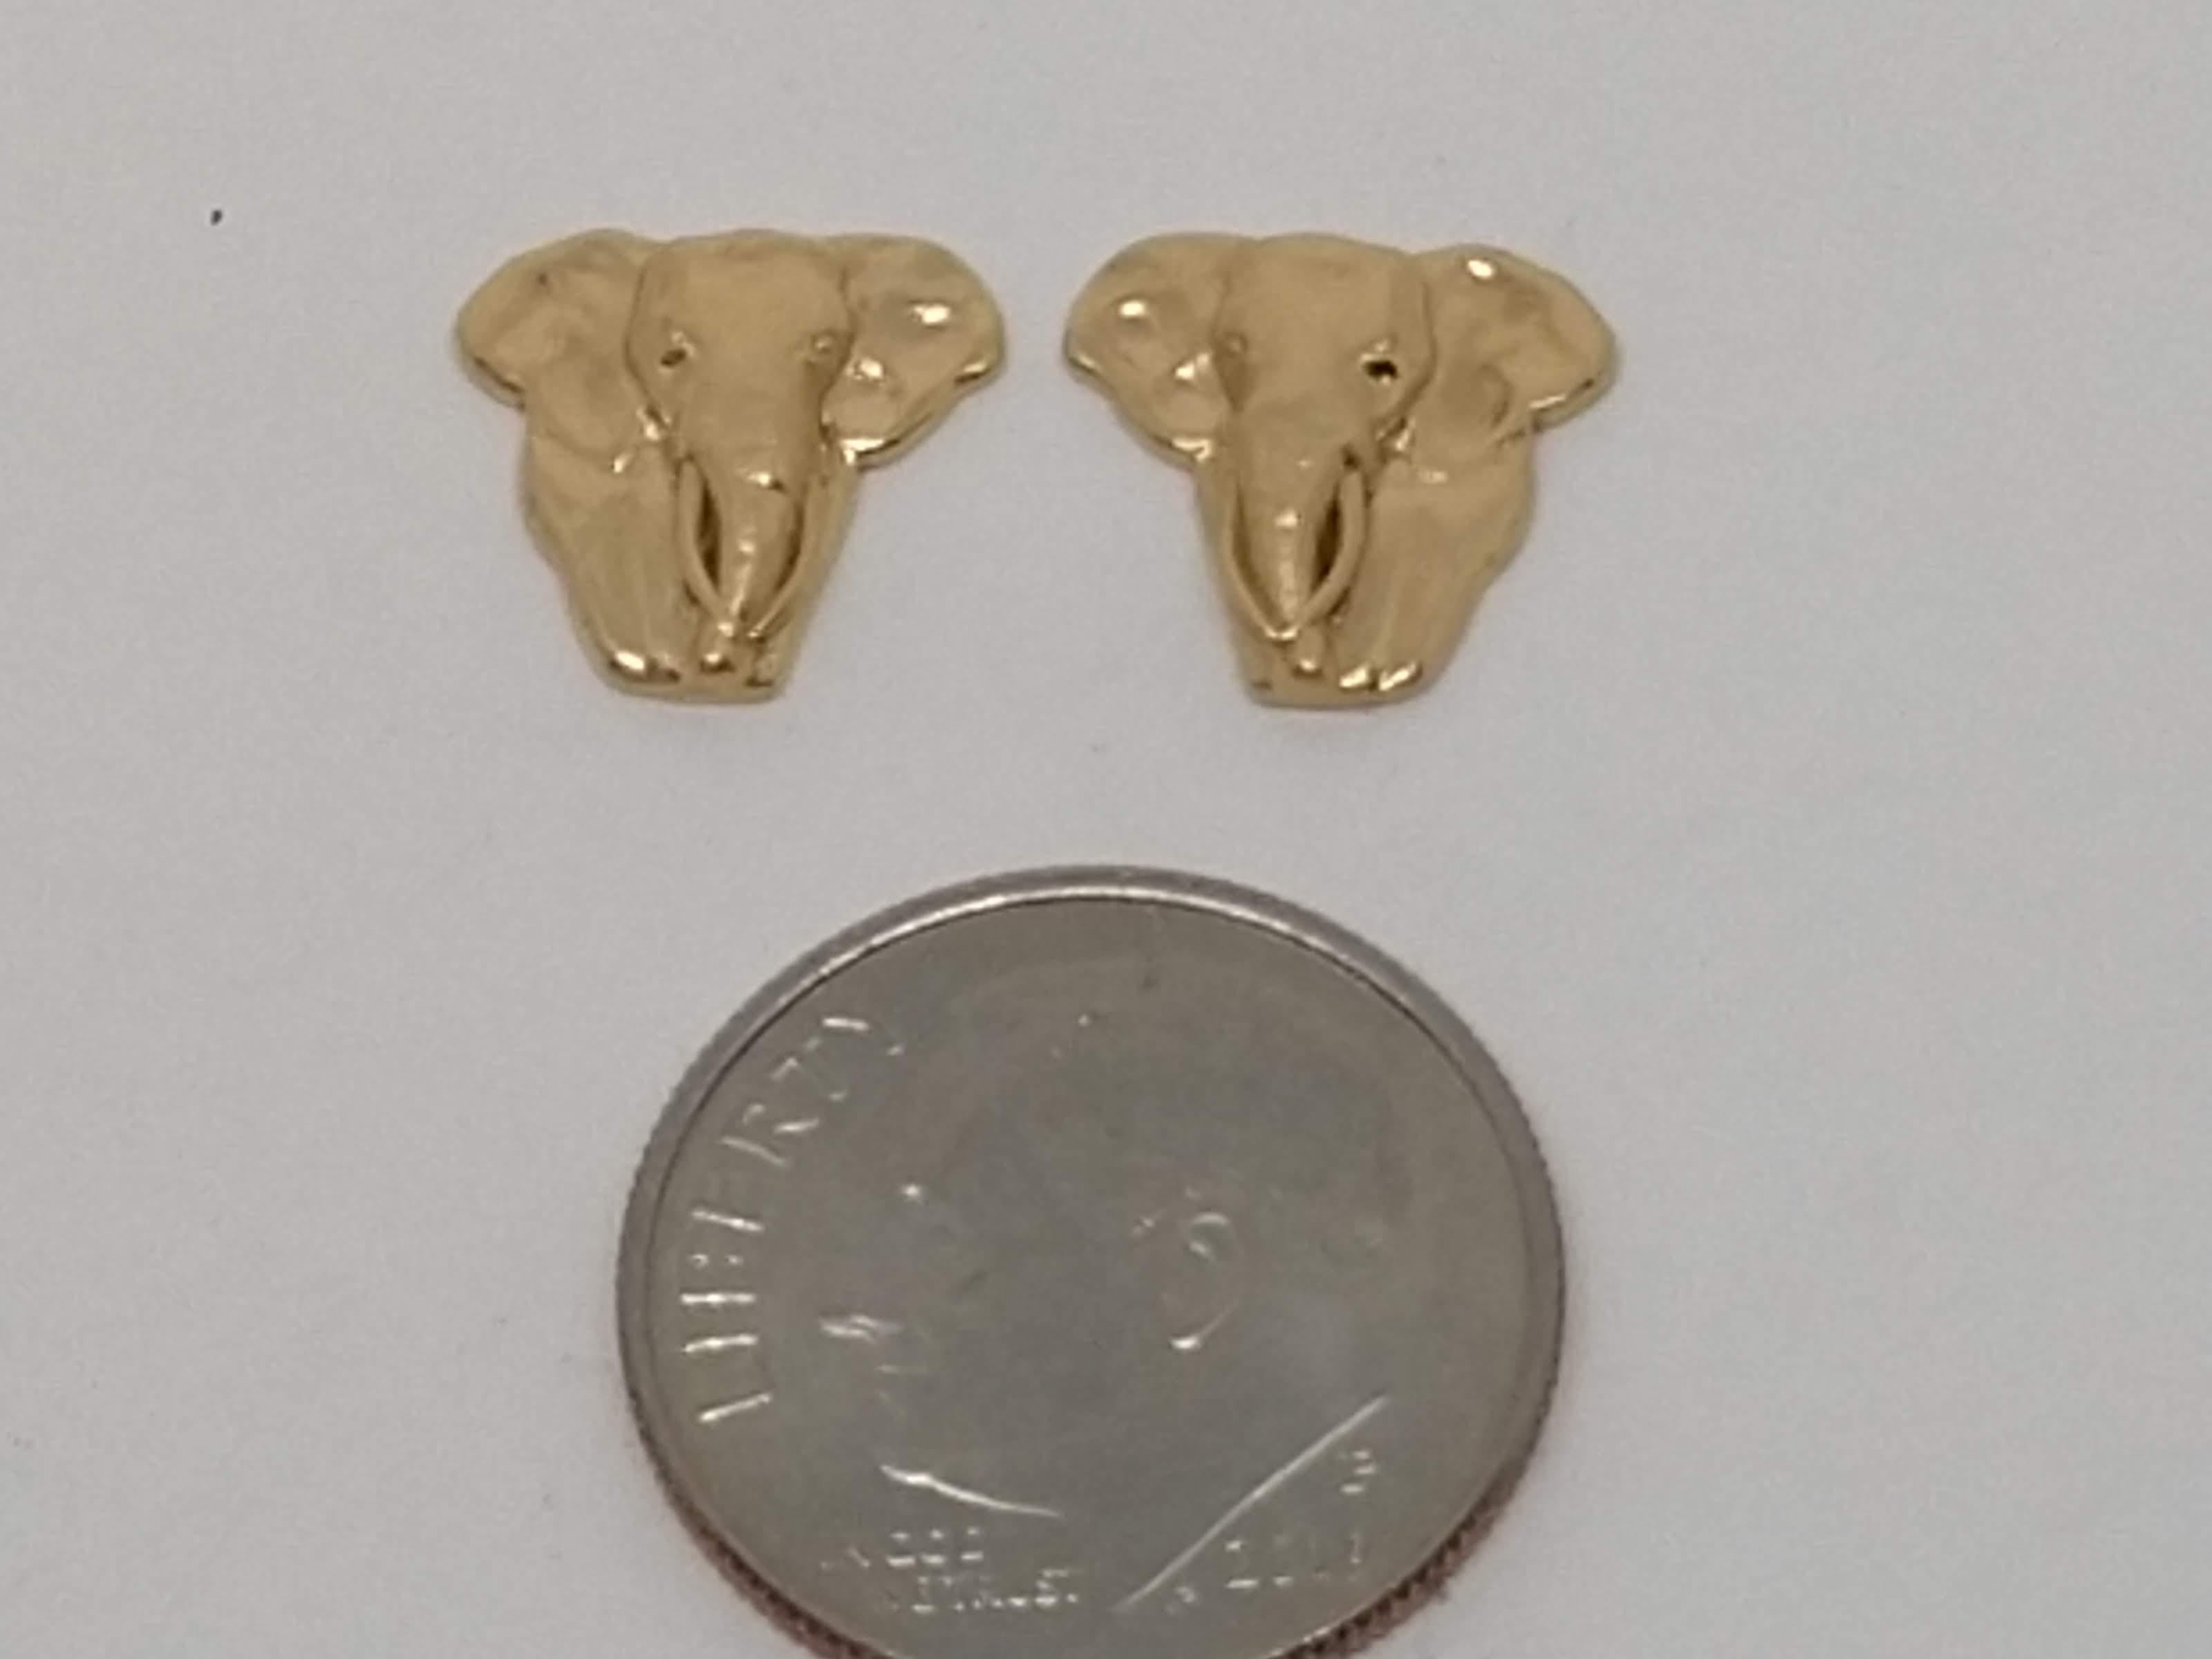 18 Karat Yellow Gold  Elephant Earrings Tiffany designer Thomas Kurilla created these earring for 1st dibs.  I am really a sculptor at heart  and these were very satisfying to make. Now it's true. No more imaginary pink elephants. Skip the pink,